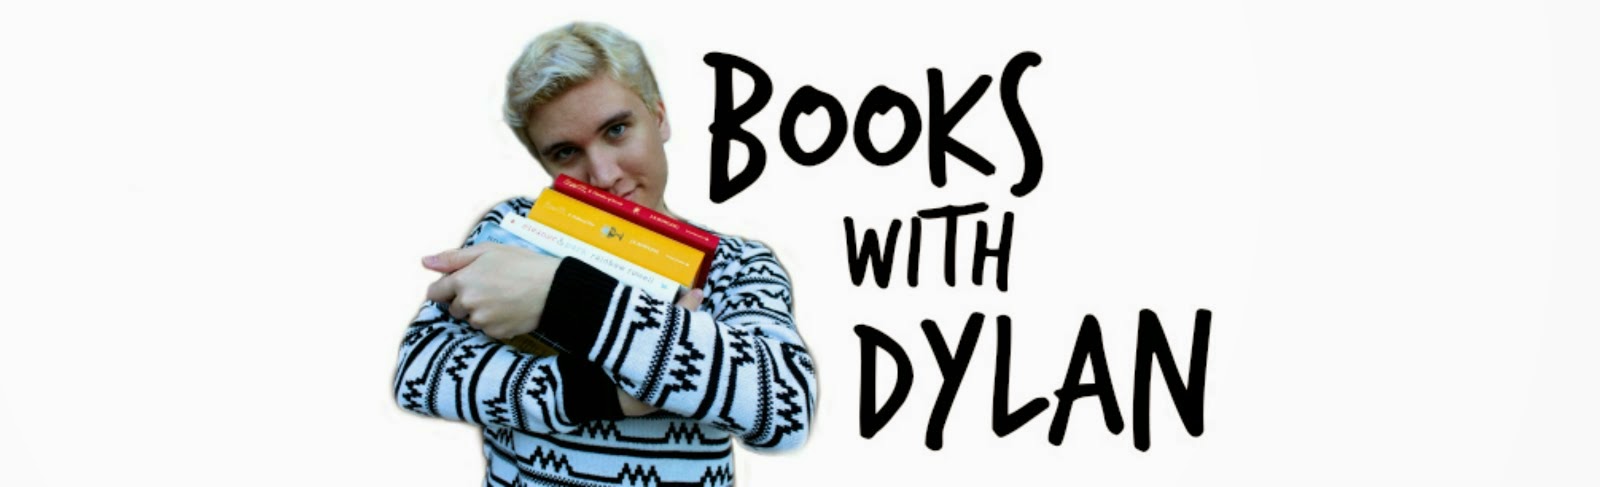 books with dylan